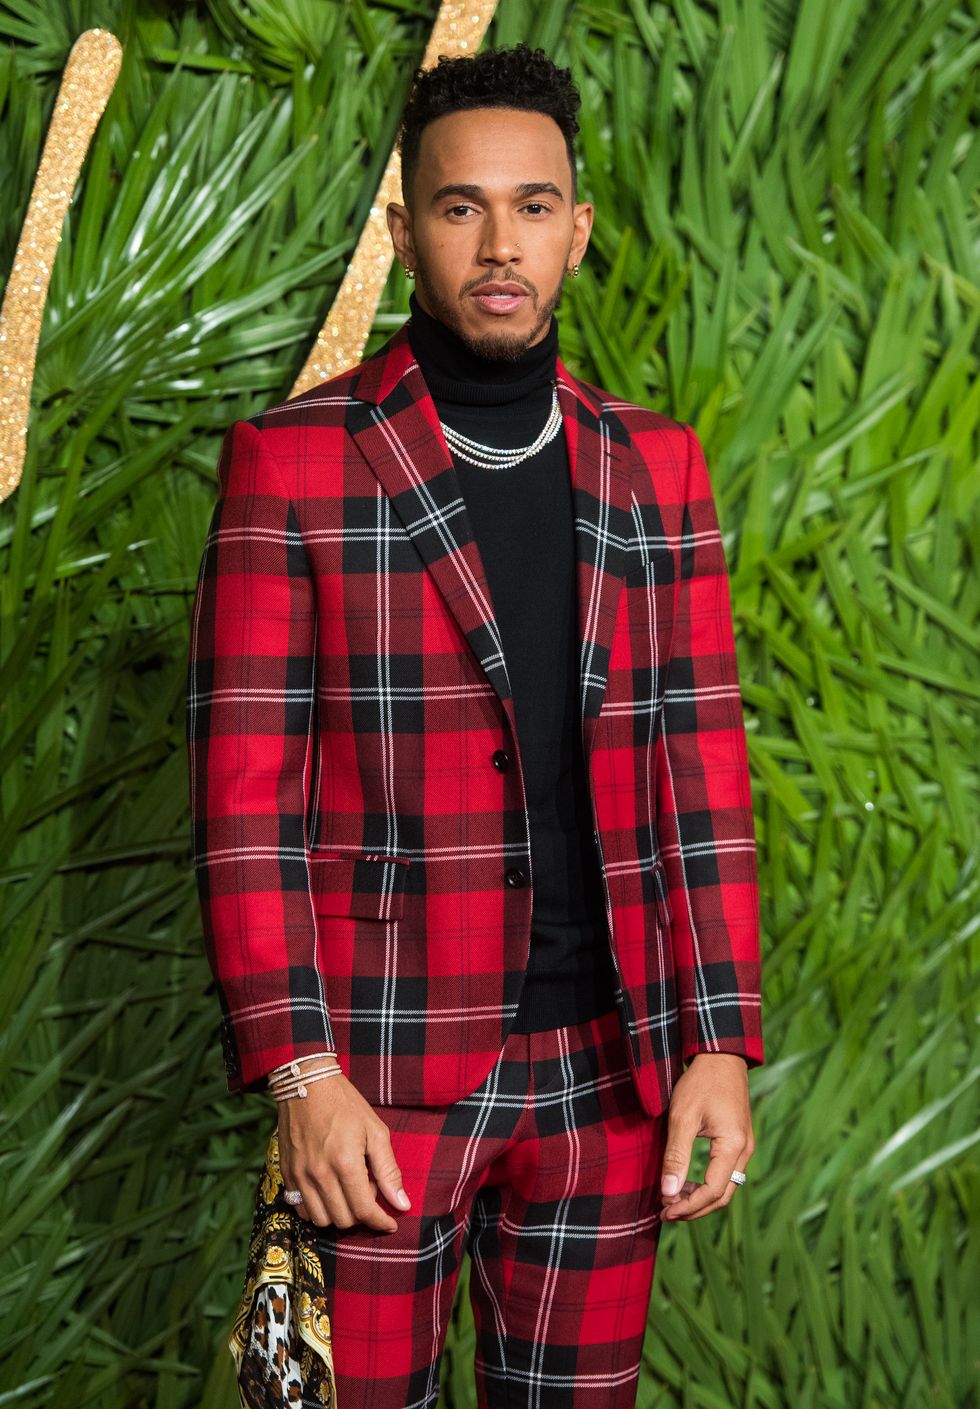 lewis hamilton attends the fashion awards 2017 in partnership with swarovski at royal albert hall